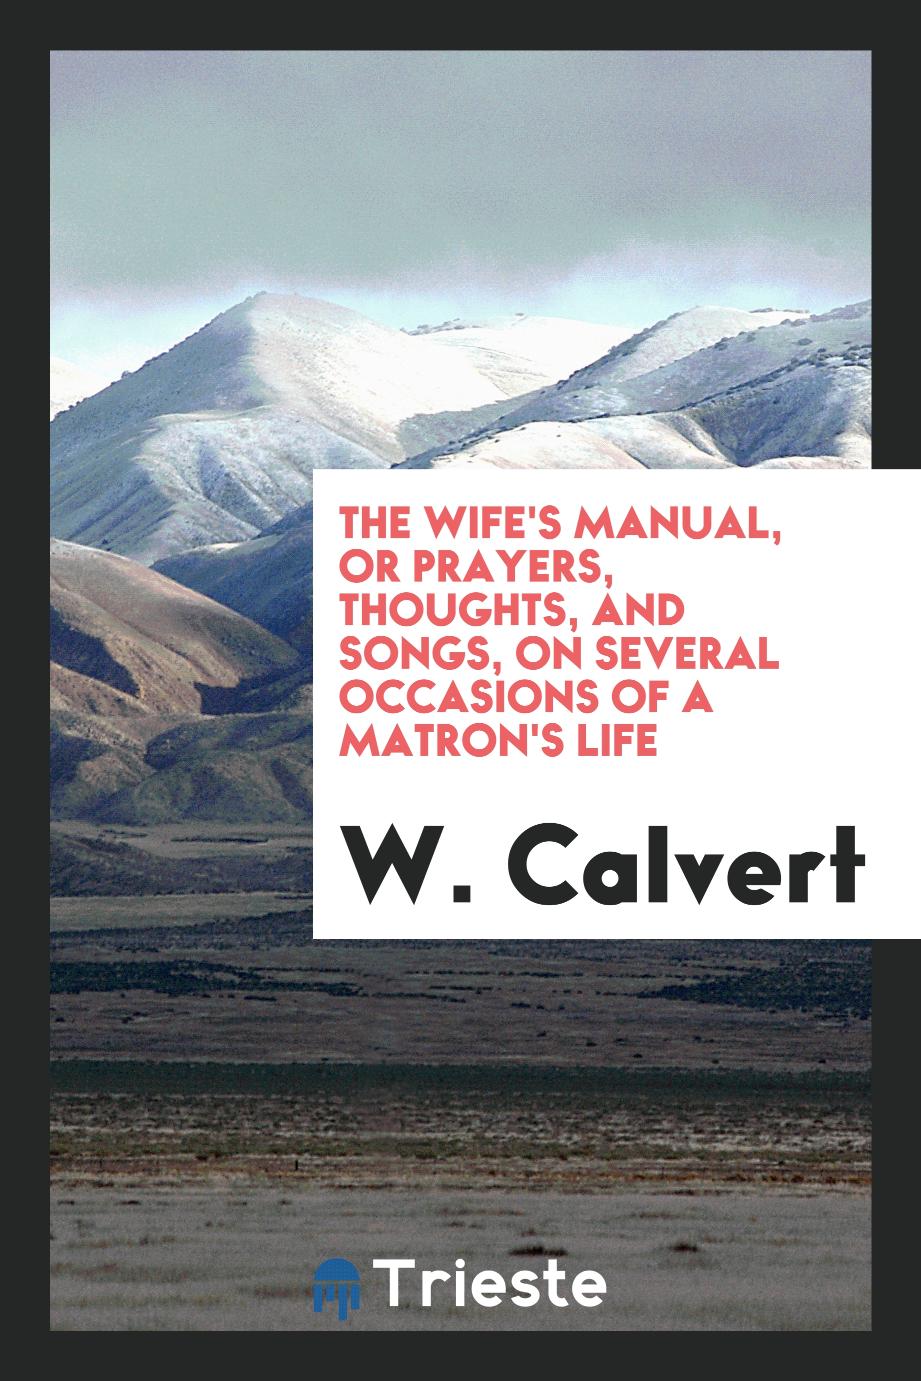 The Wife's Manual, or Prayers, Thoughts, and Songs, on Several Occasions of a Matron's Life